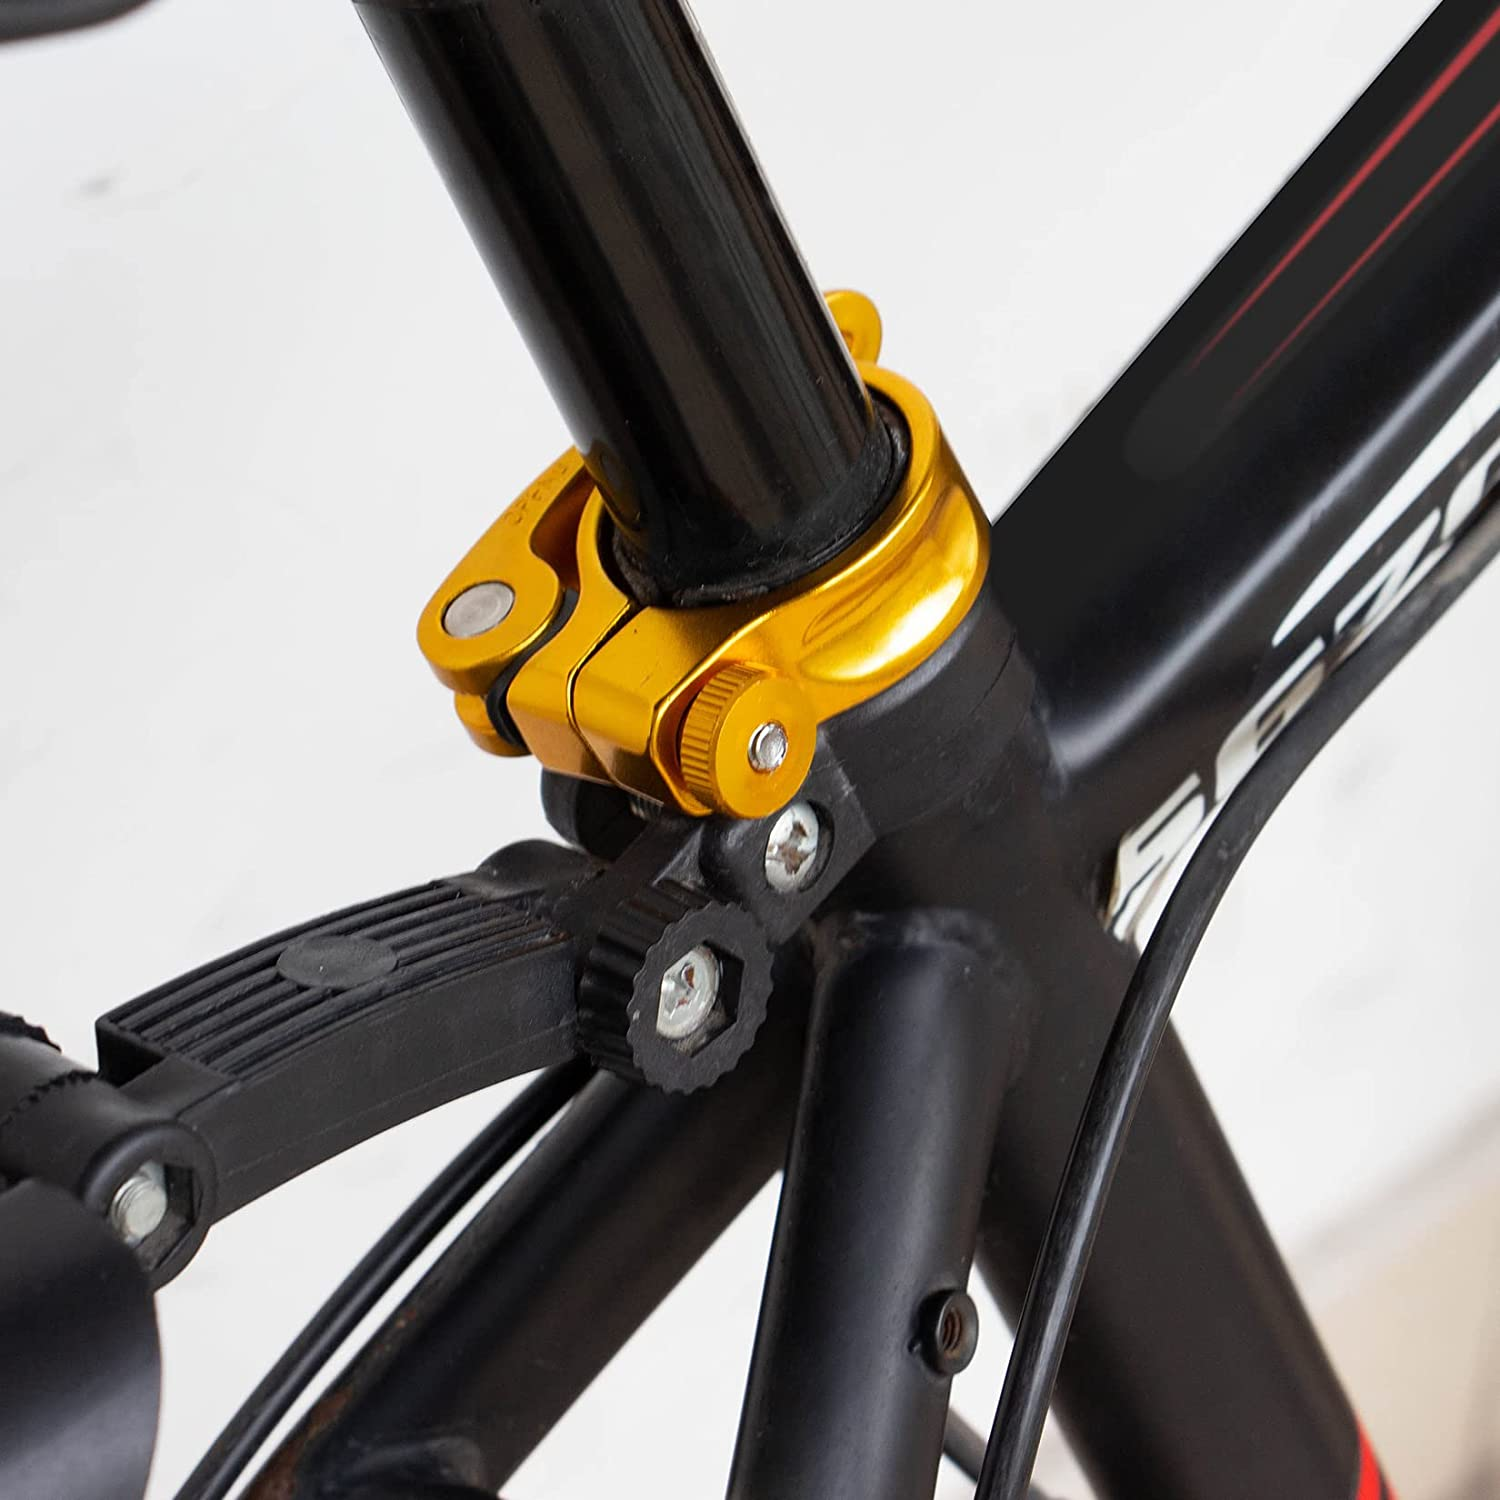 To fix a mountain bike seat that keeps sliding down, check that the seat clamp is properly secured.